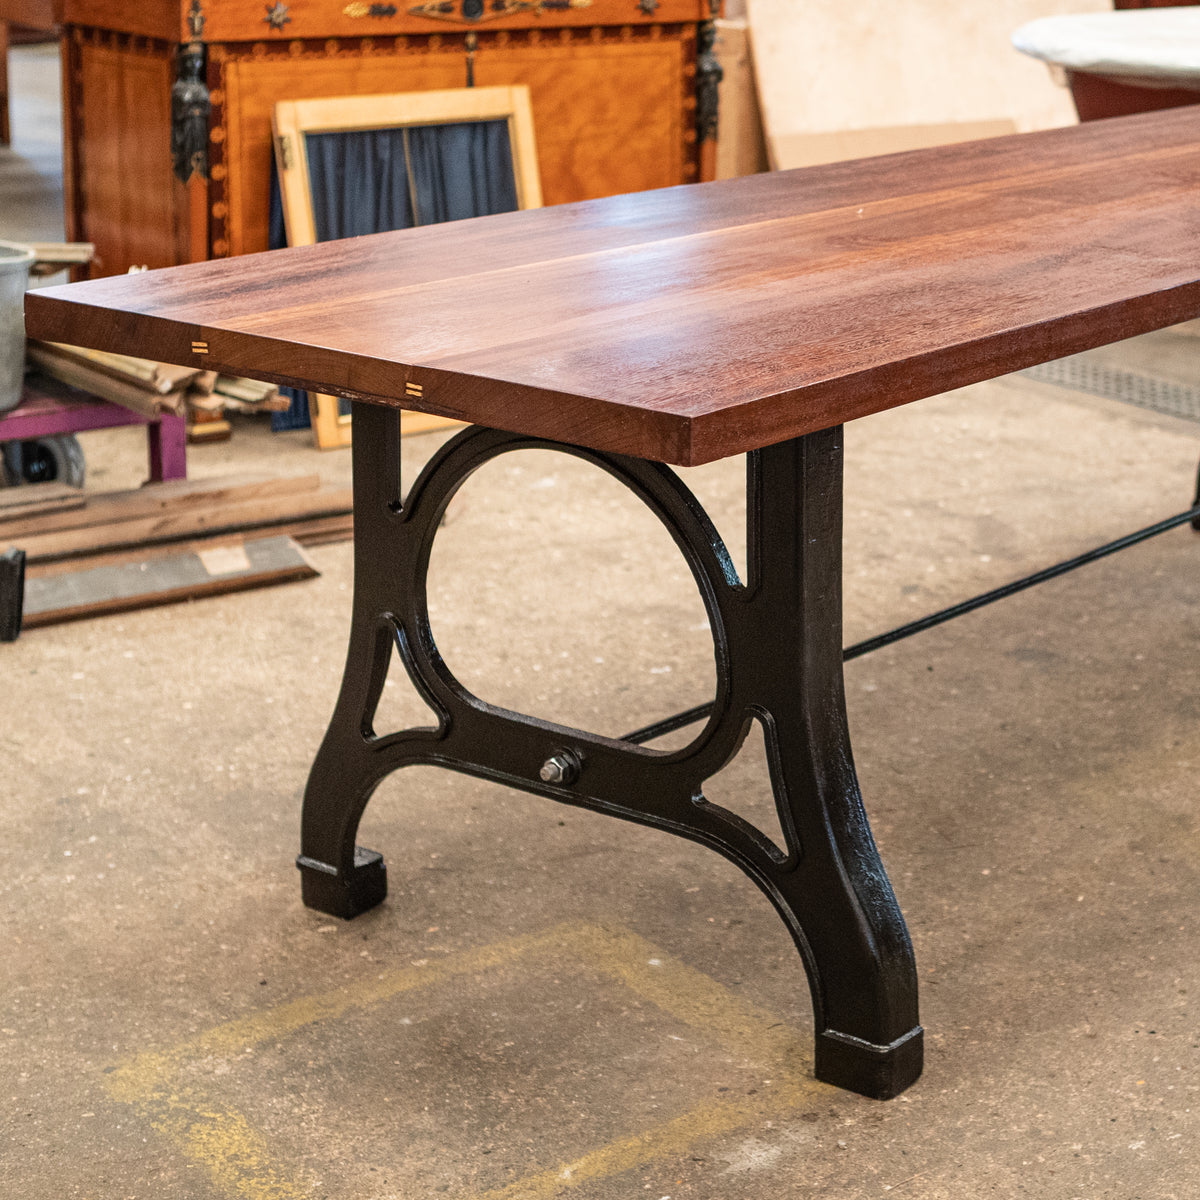 Teak Plank TopTable With Industrial Cast Iron Legs | The Architectural Forum